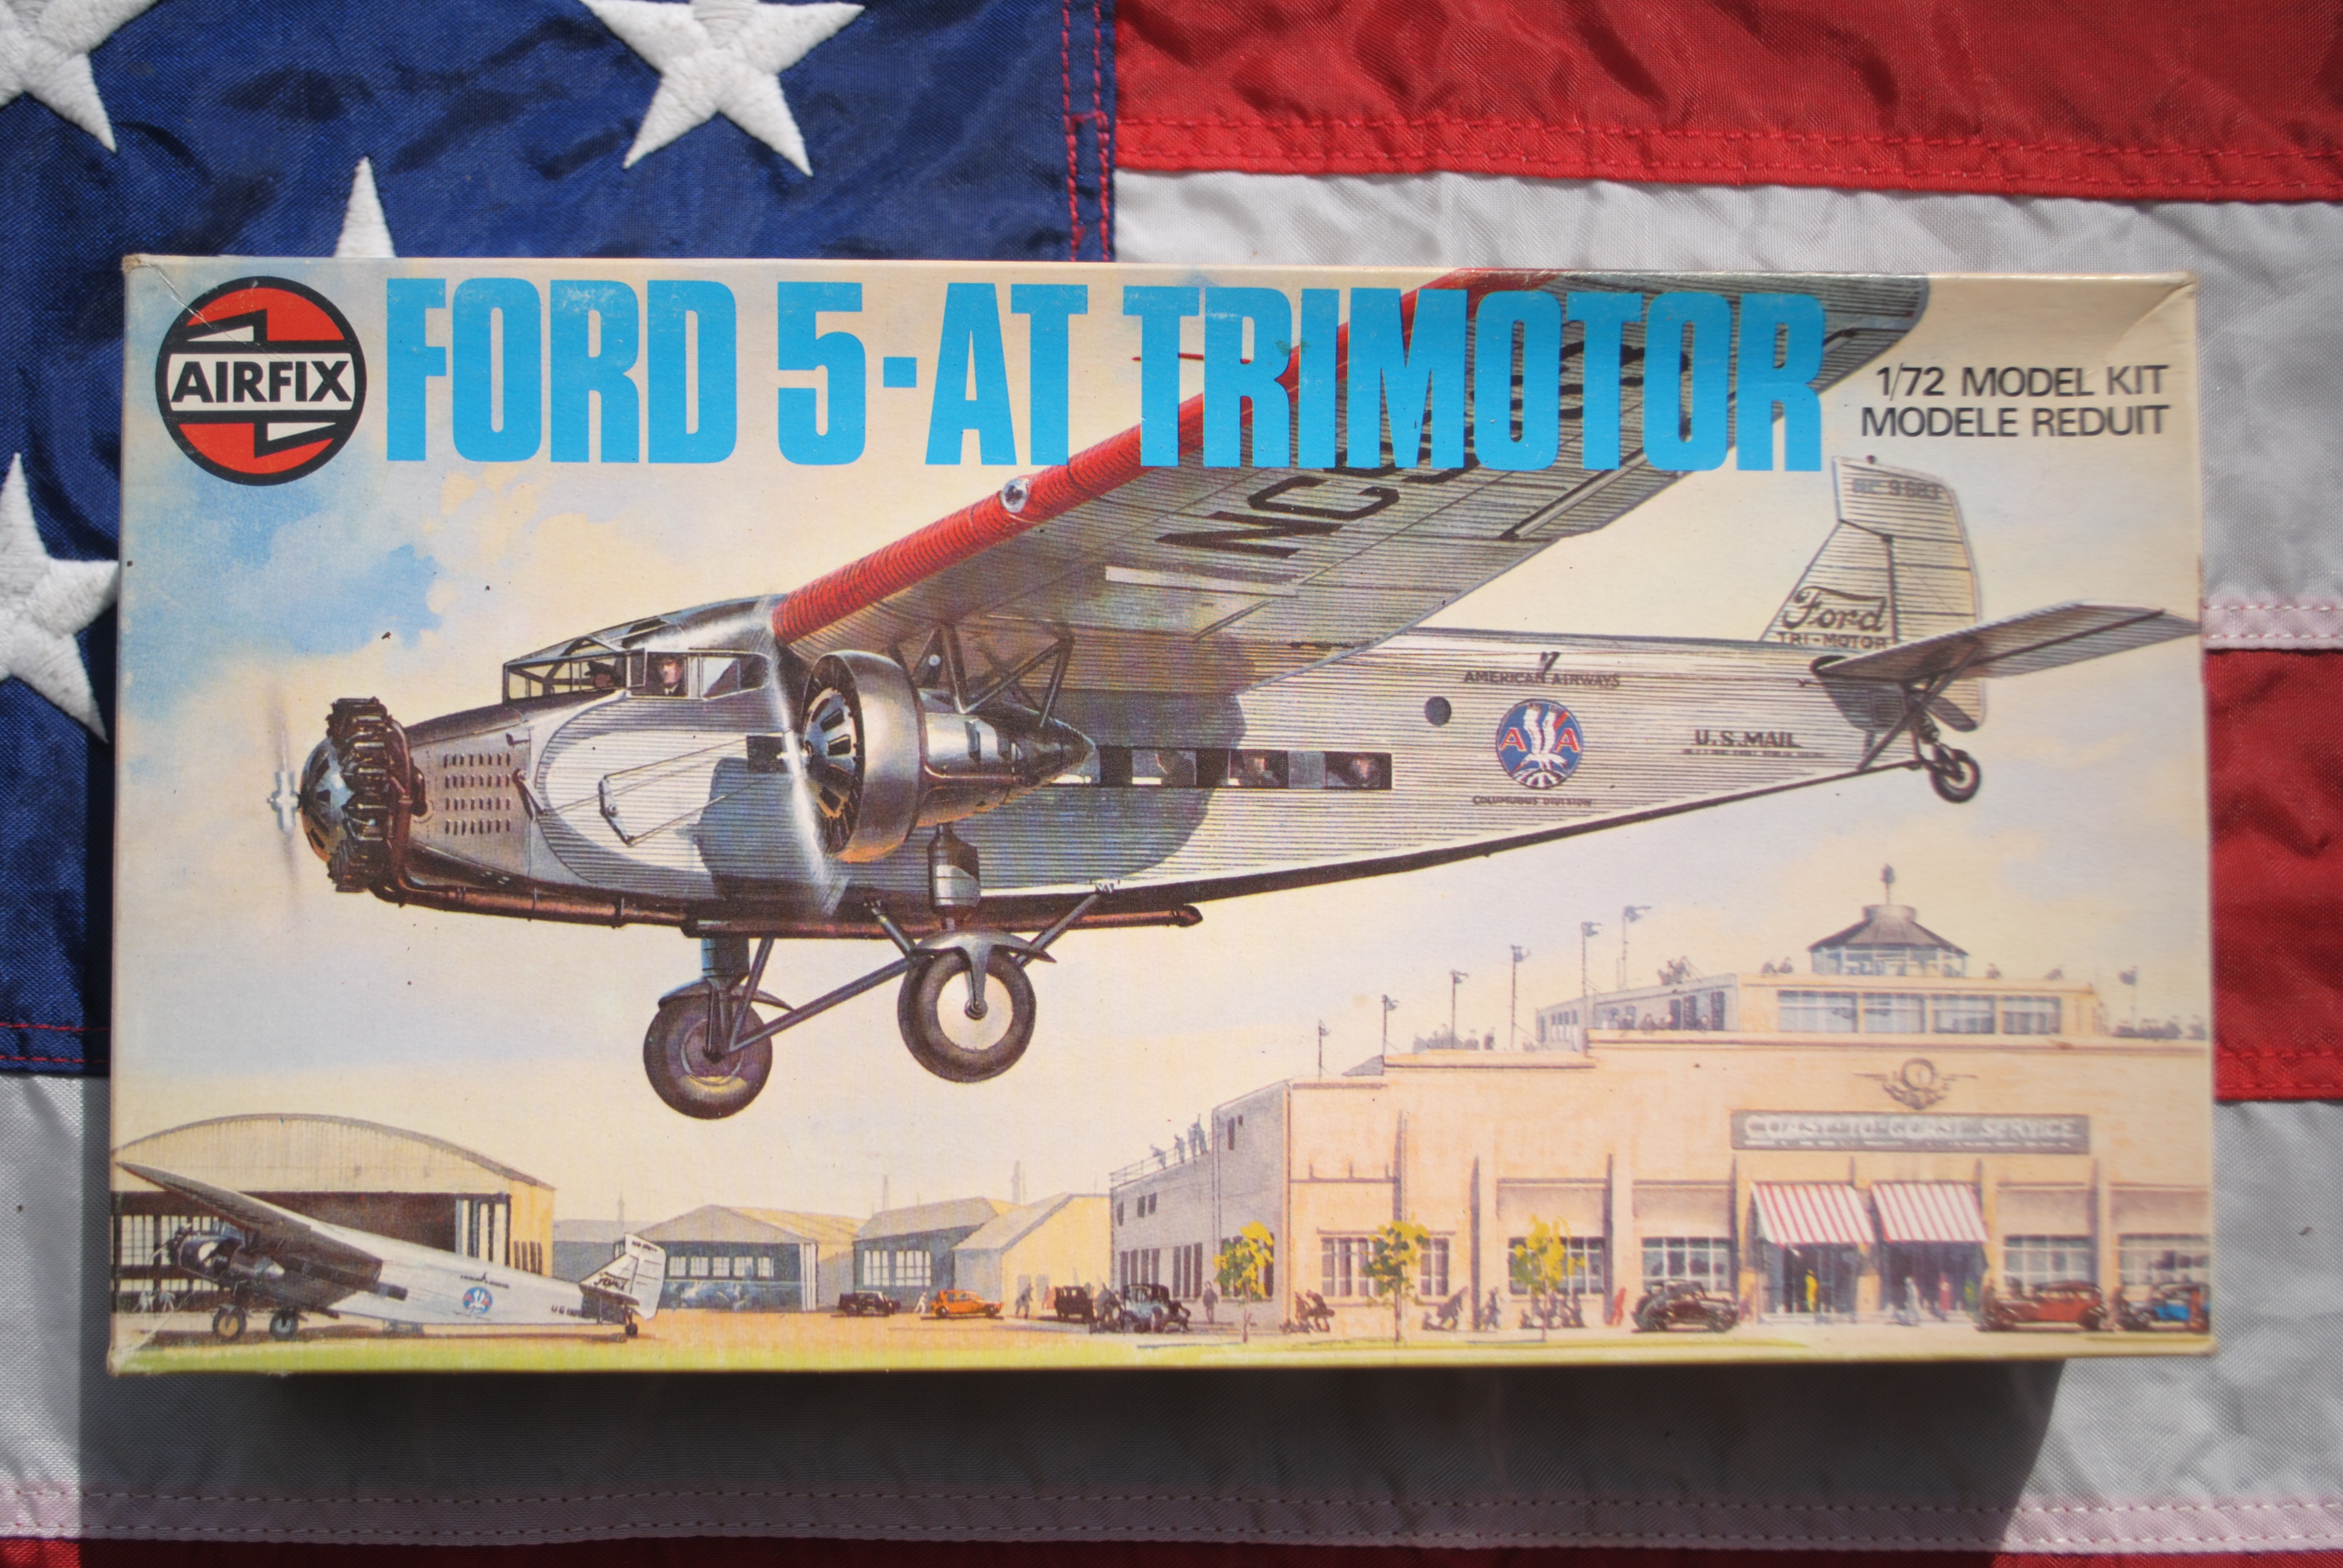 Airfix 04009-9 Ford 5-AT Trimotor